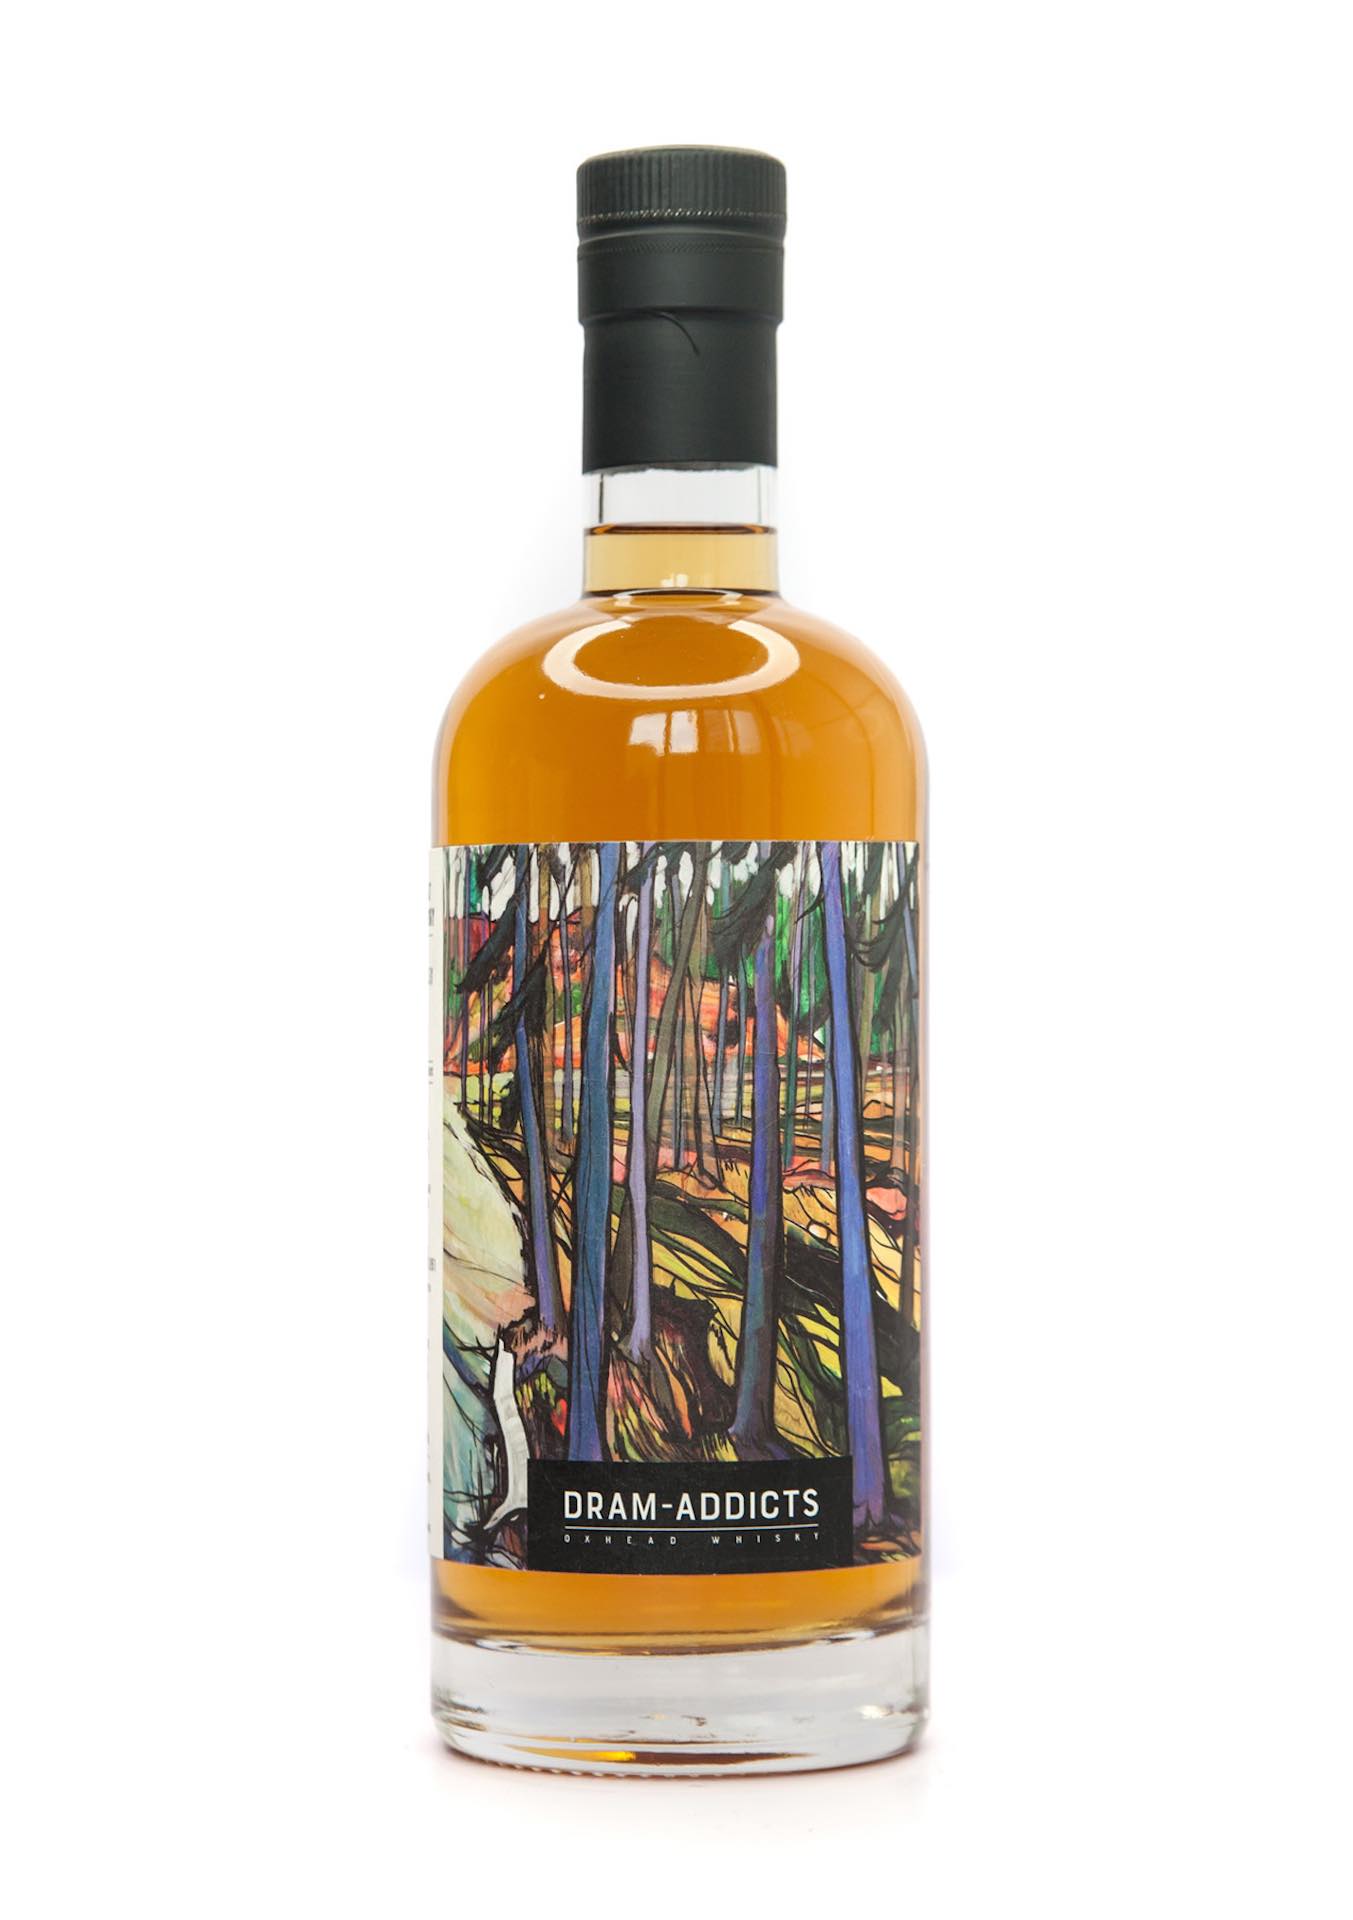 Oxhead Dram-Addicts: Secret Orkney 16 Year Old Single Cask Whisky